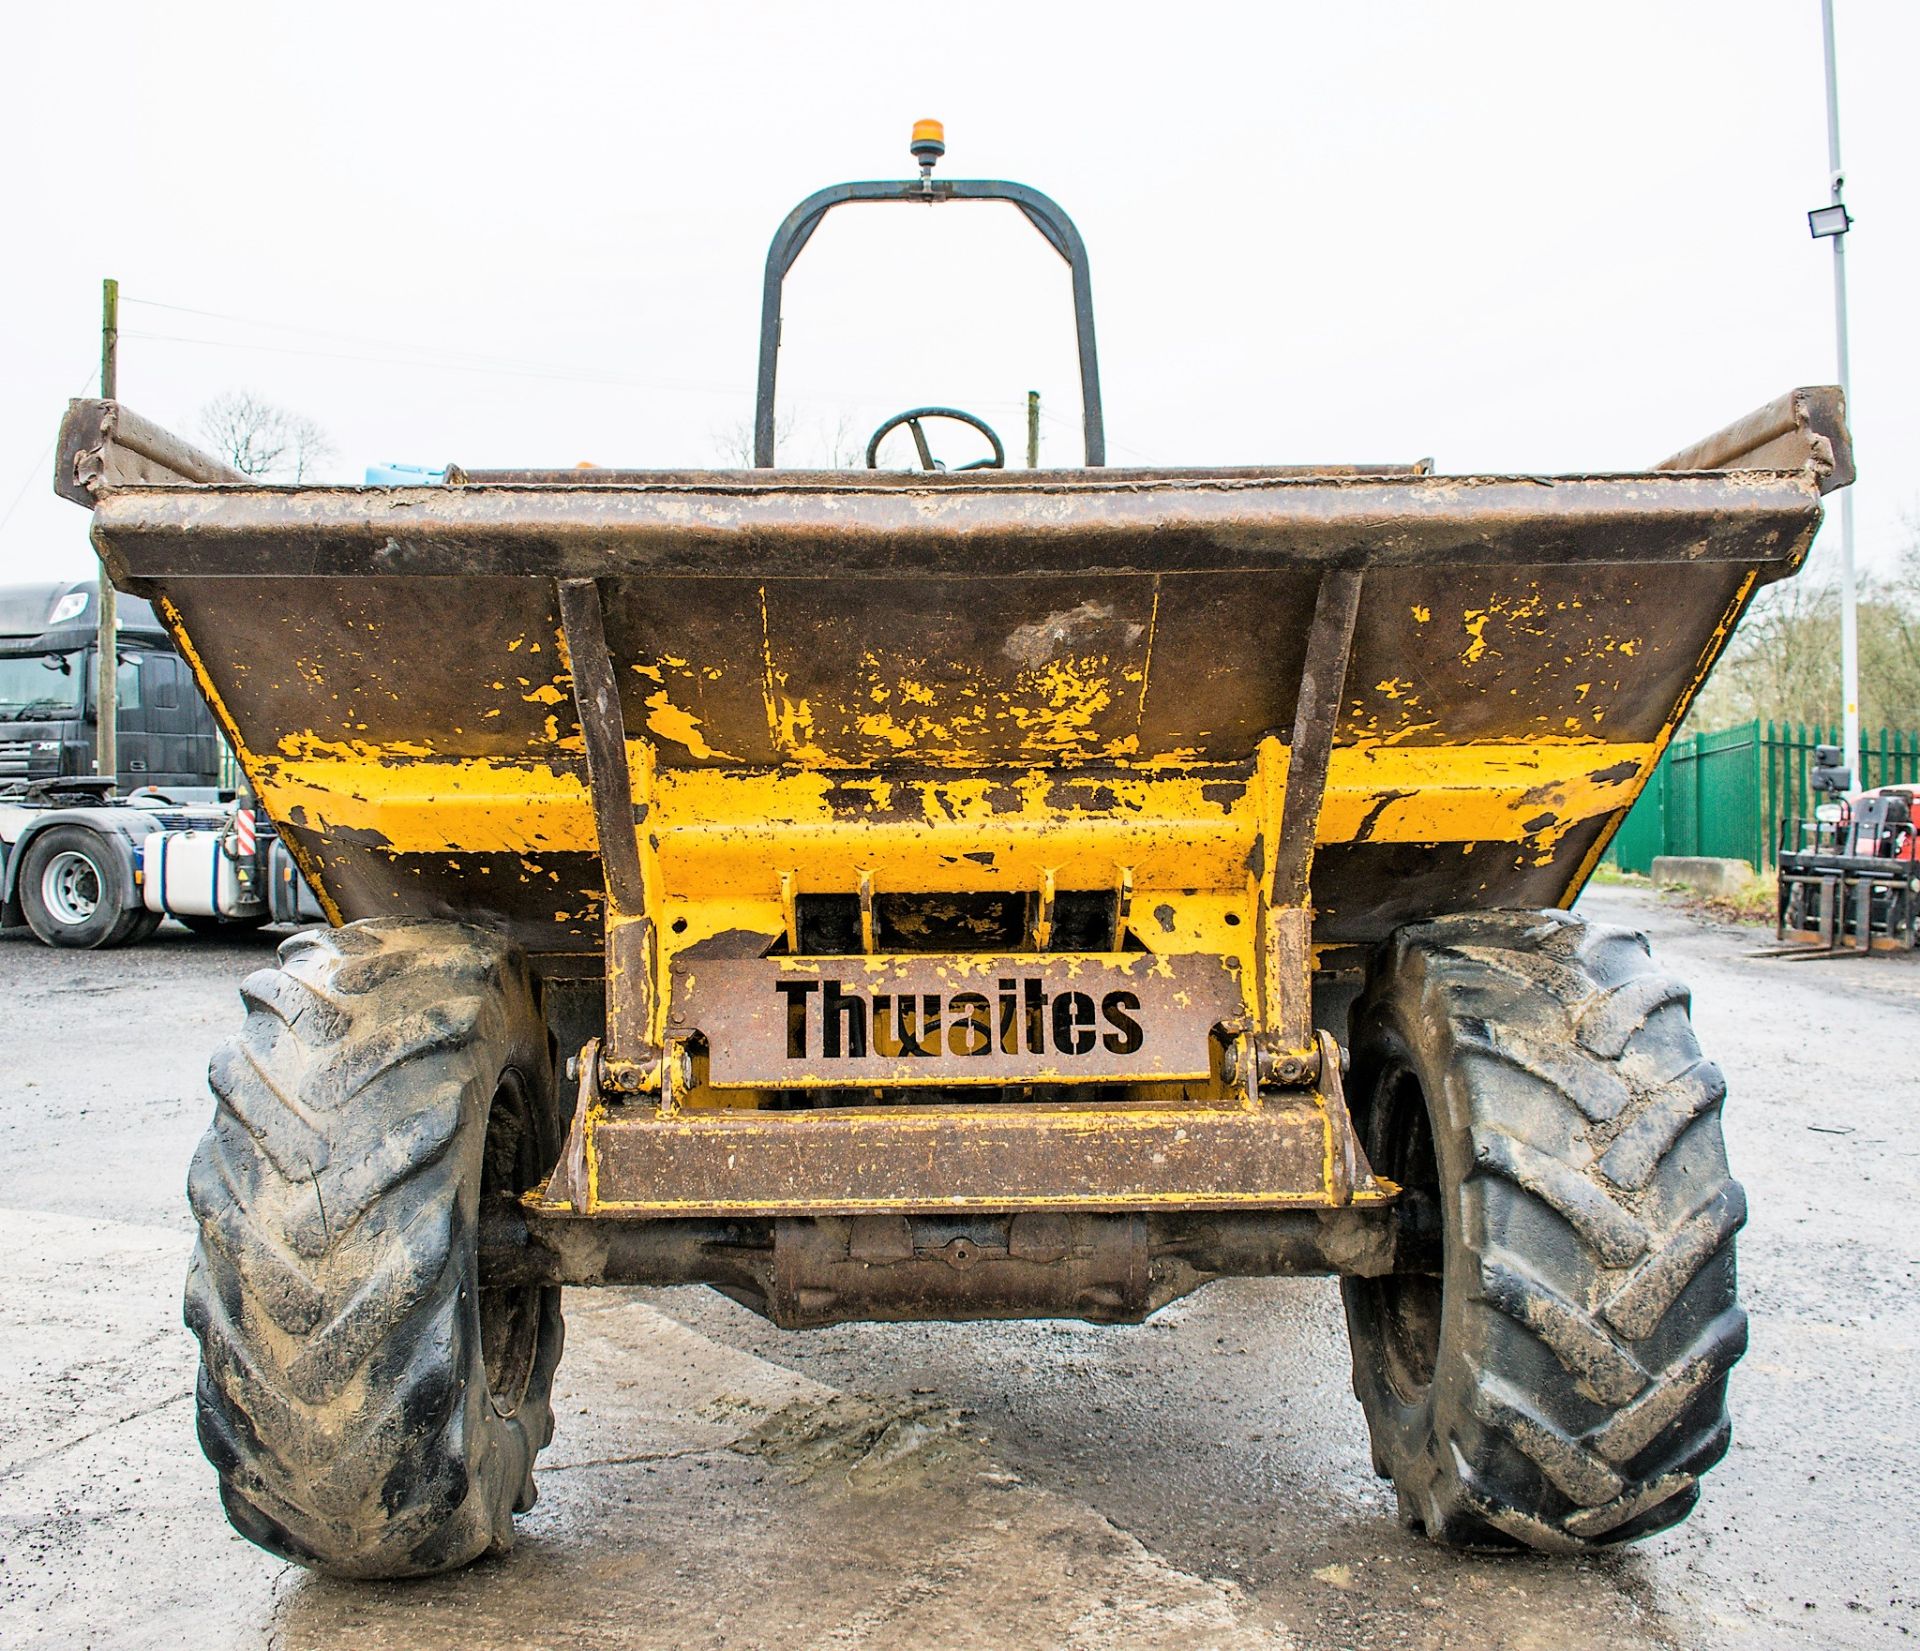 Thwaites 6 tonne straight skip dumper  Year: 2005 S/N: 7A6588 Recorded Hours: 4746 - Image 5 of 11